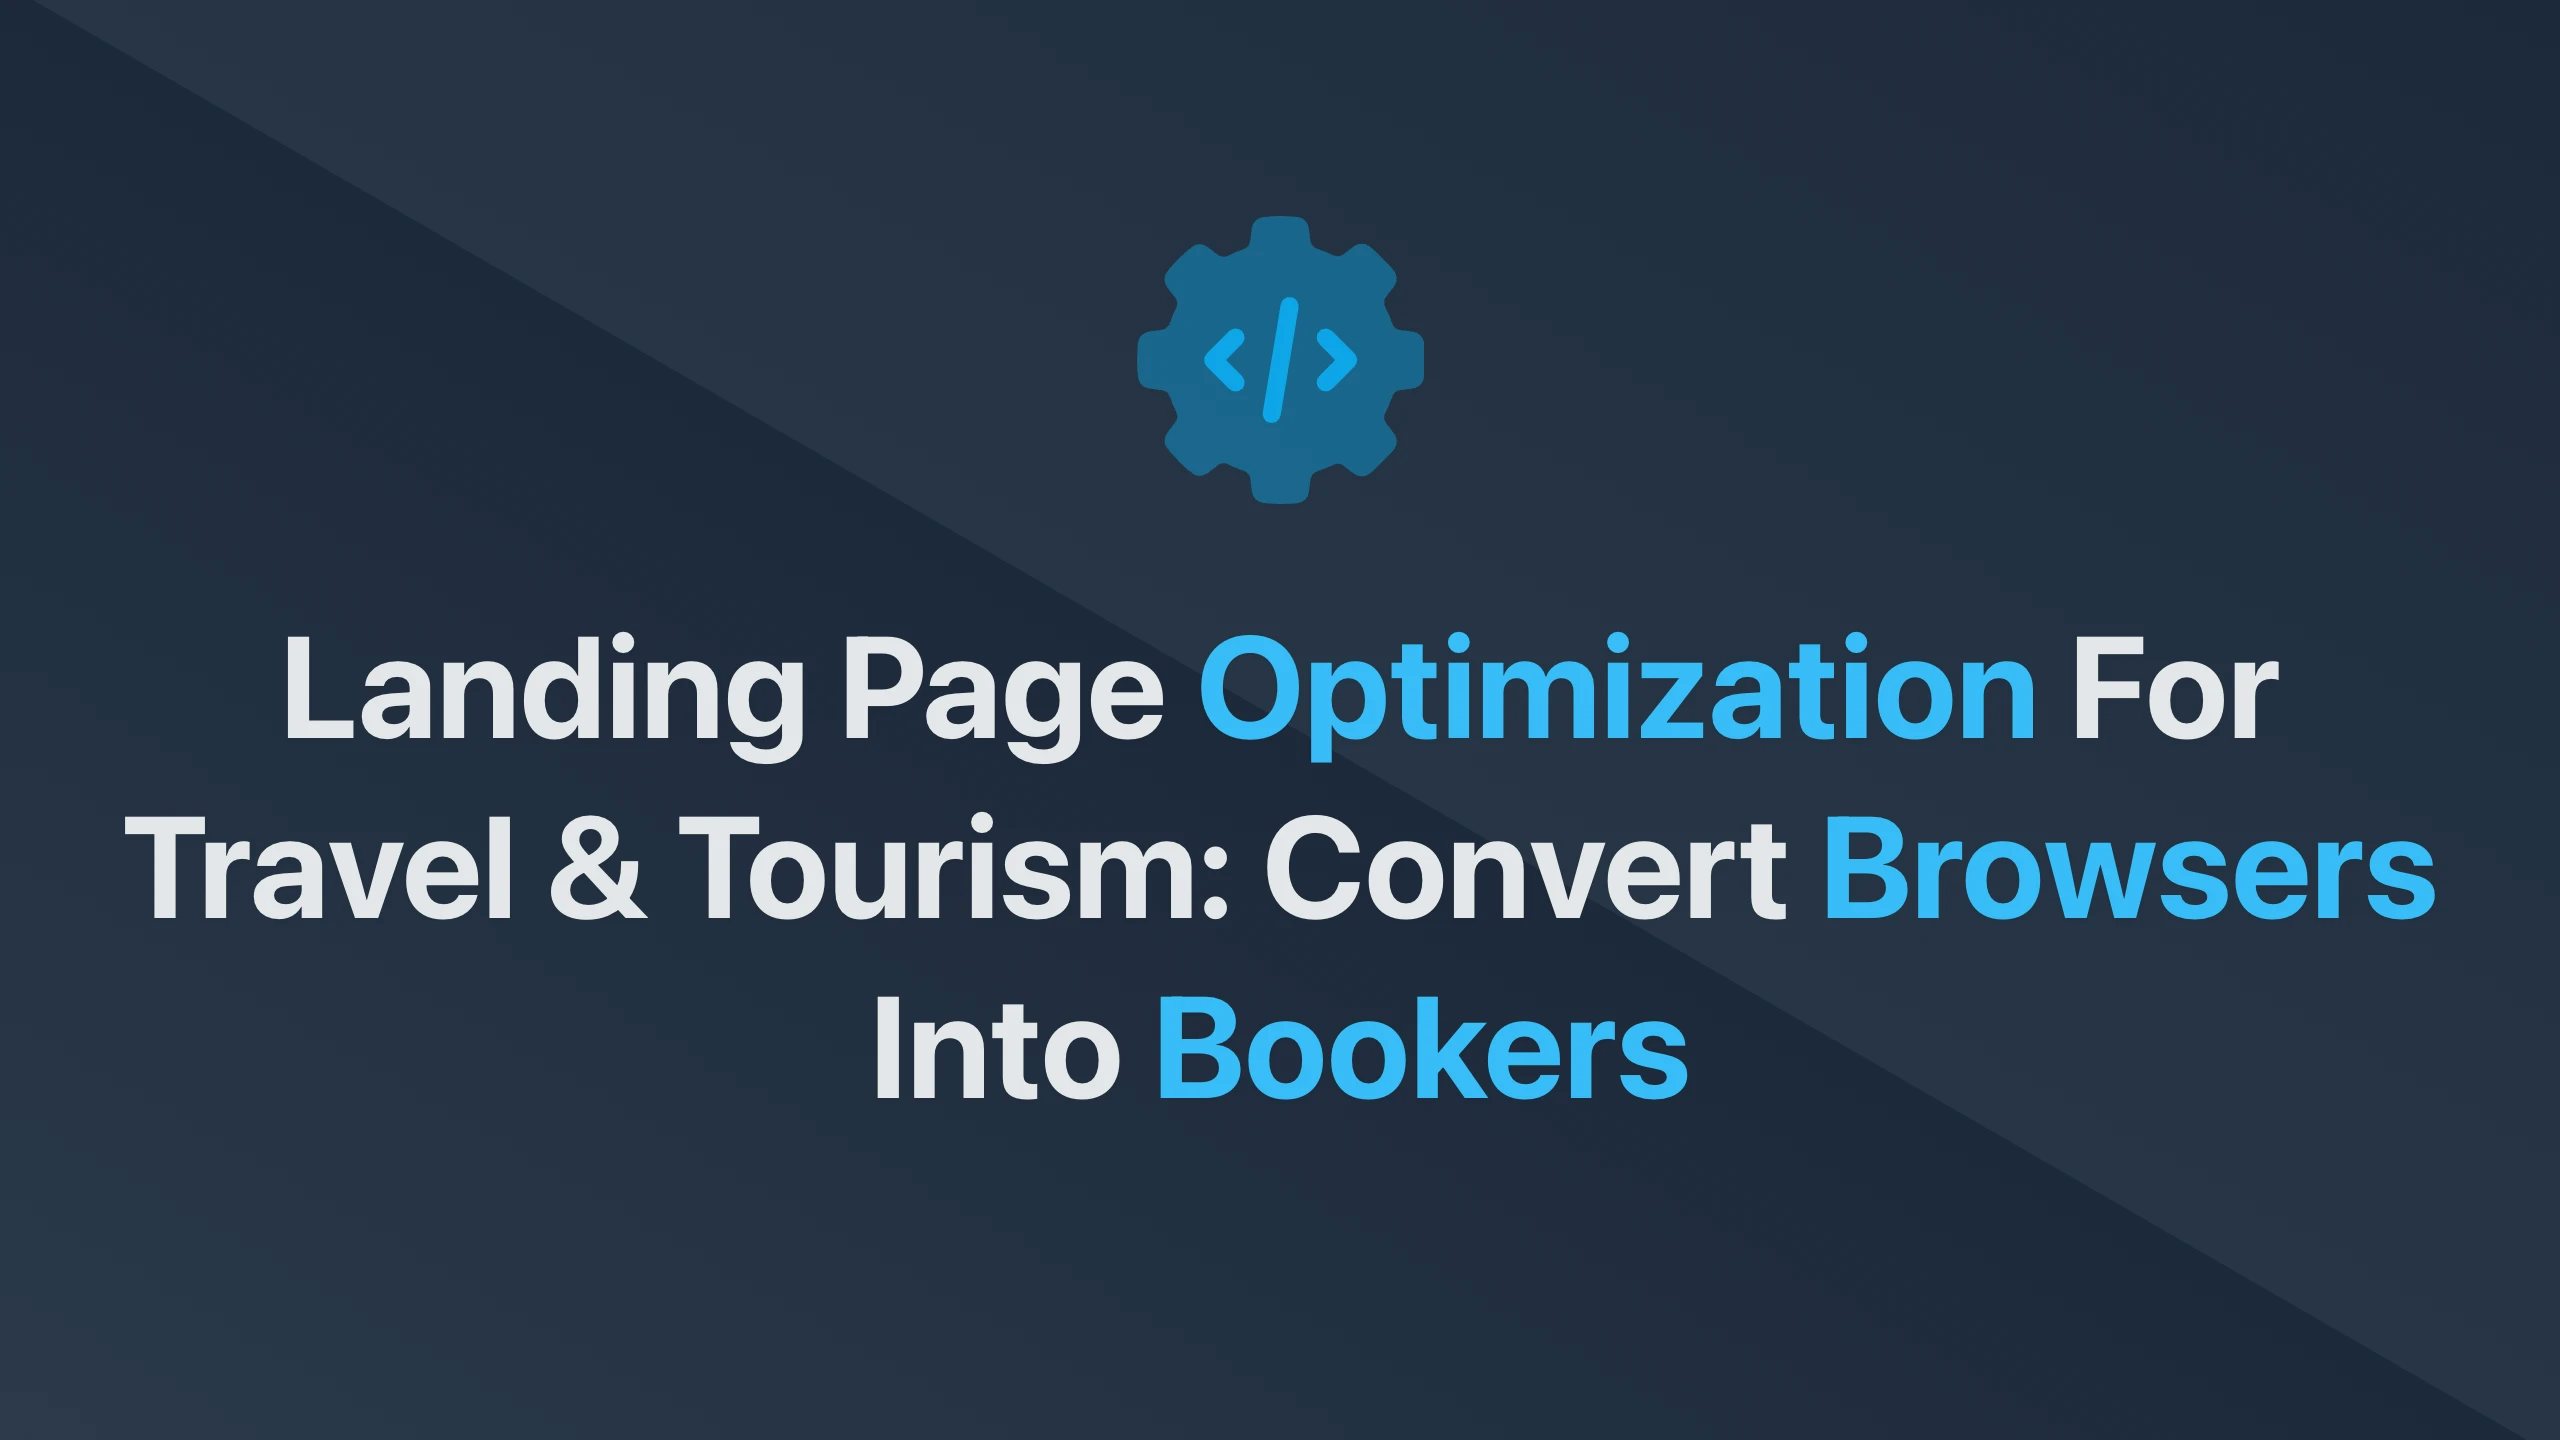 Cover Image for Landing Page Optimization for Travel & Tourism: Convert Browsers into Bookers